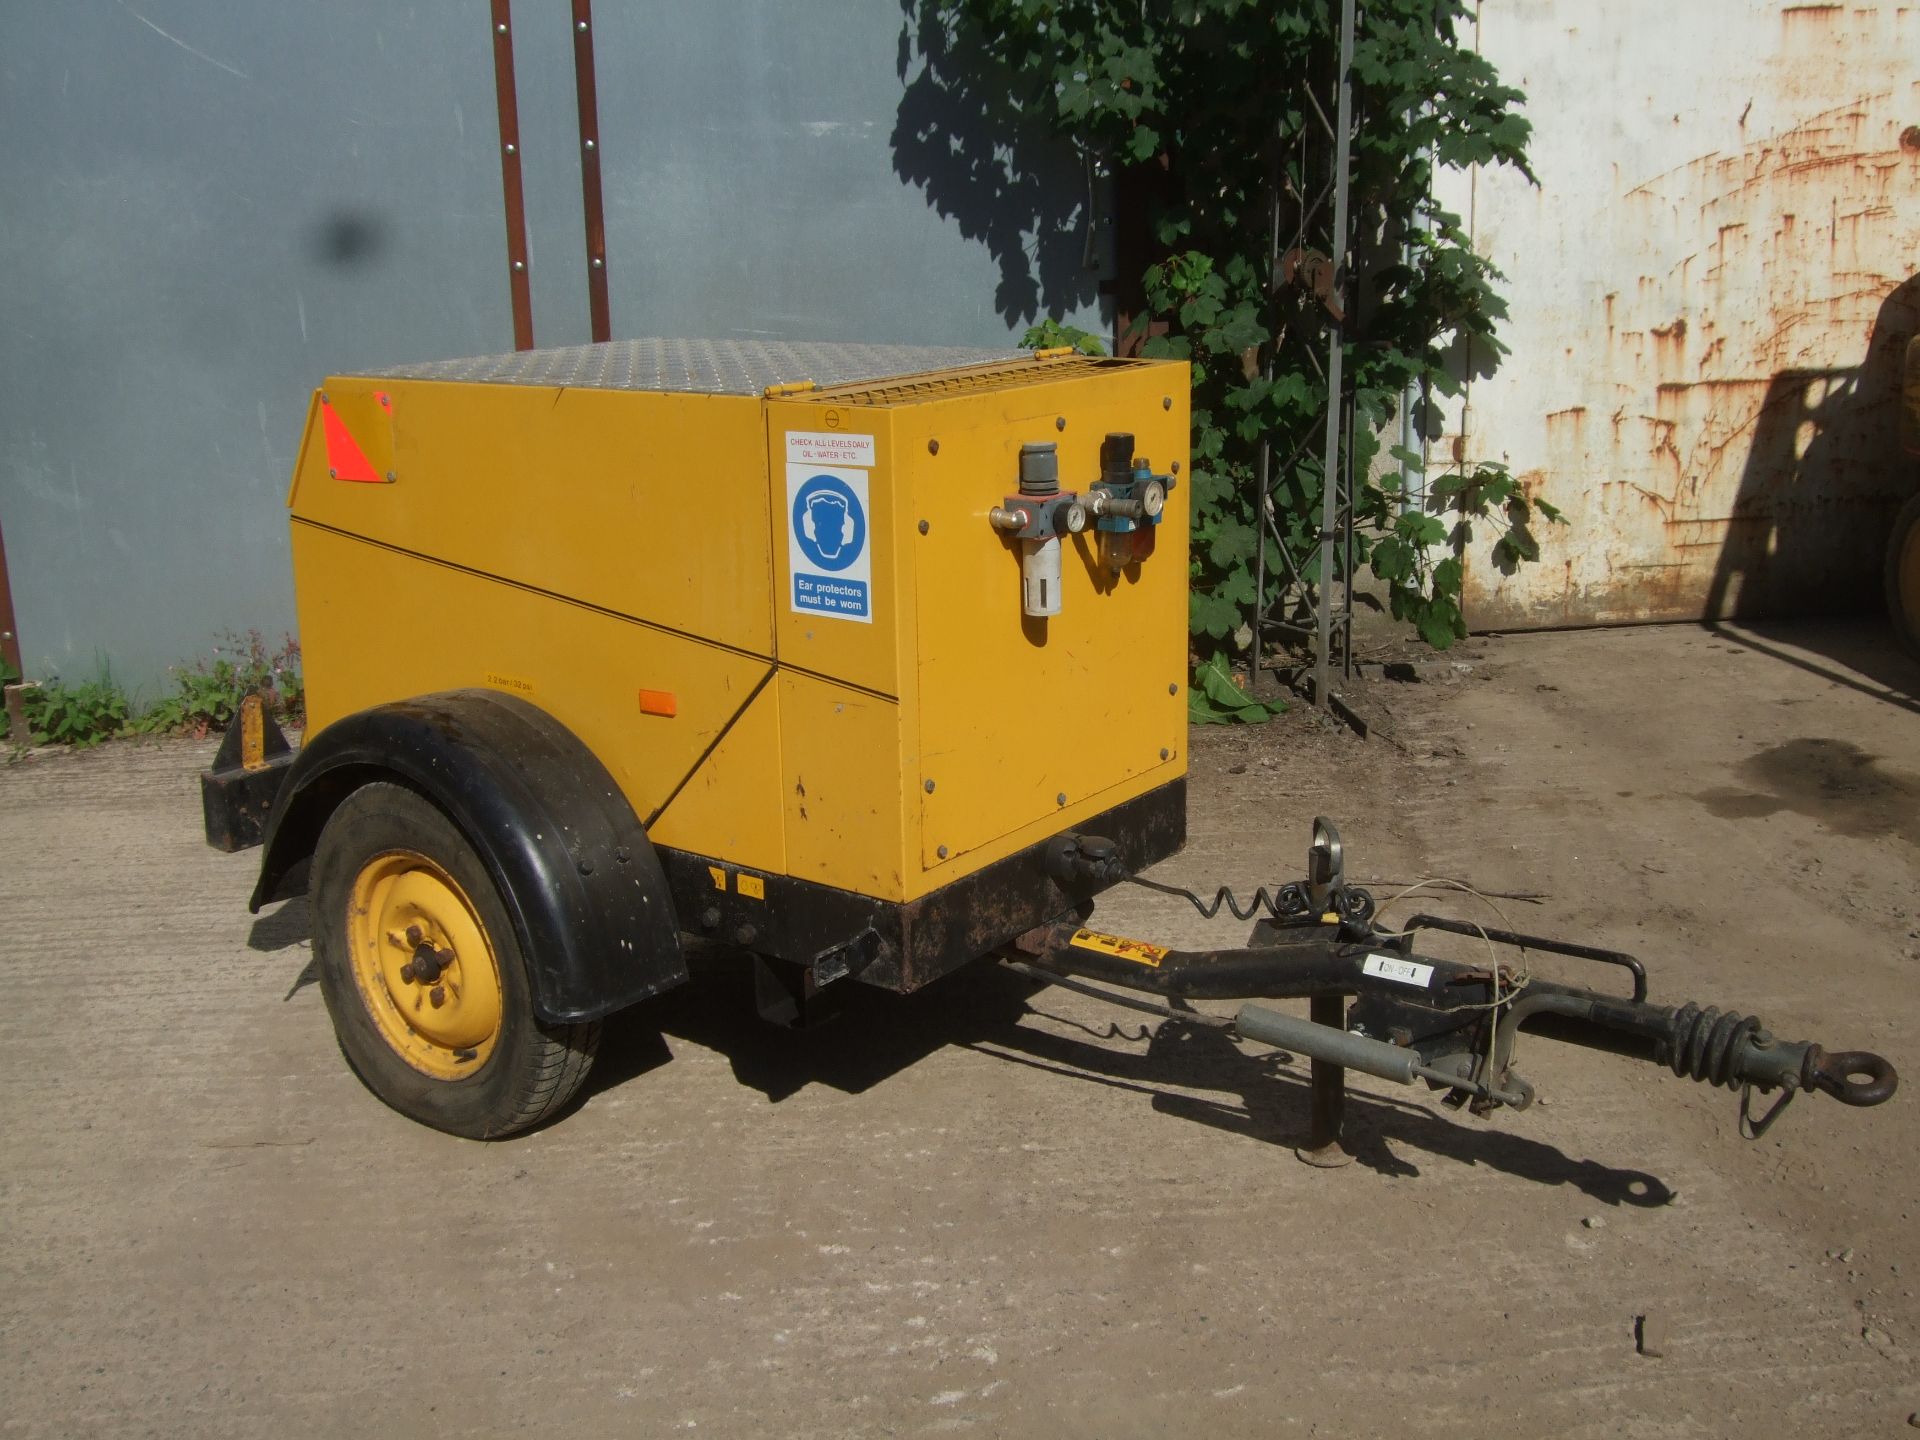 COMPAIR DIESEL ROAD TOW COMPRESSOR - 2 TOOL - VERY LITTLE USE